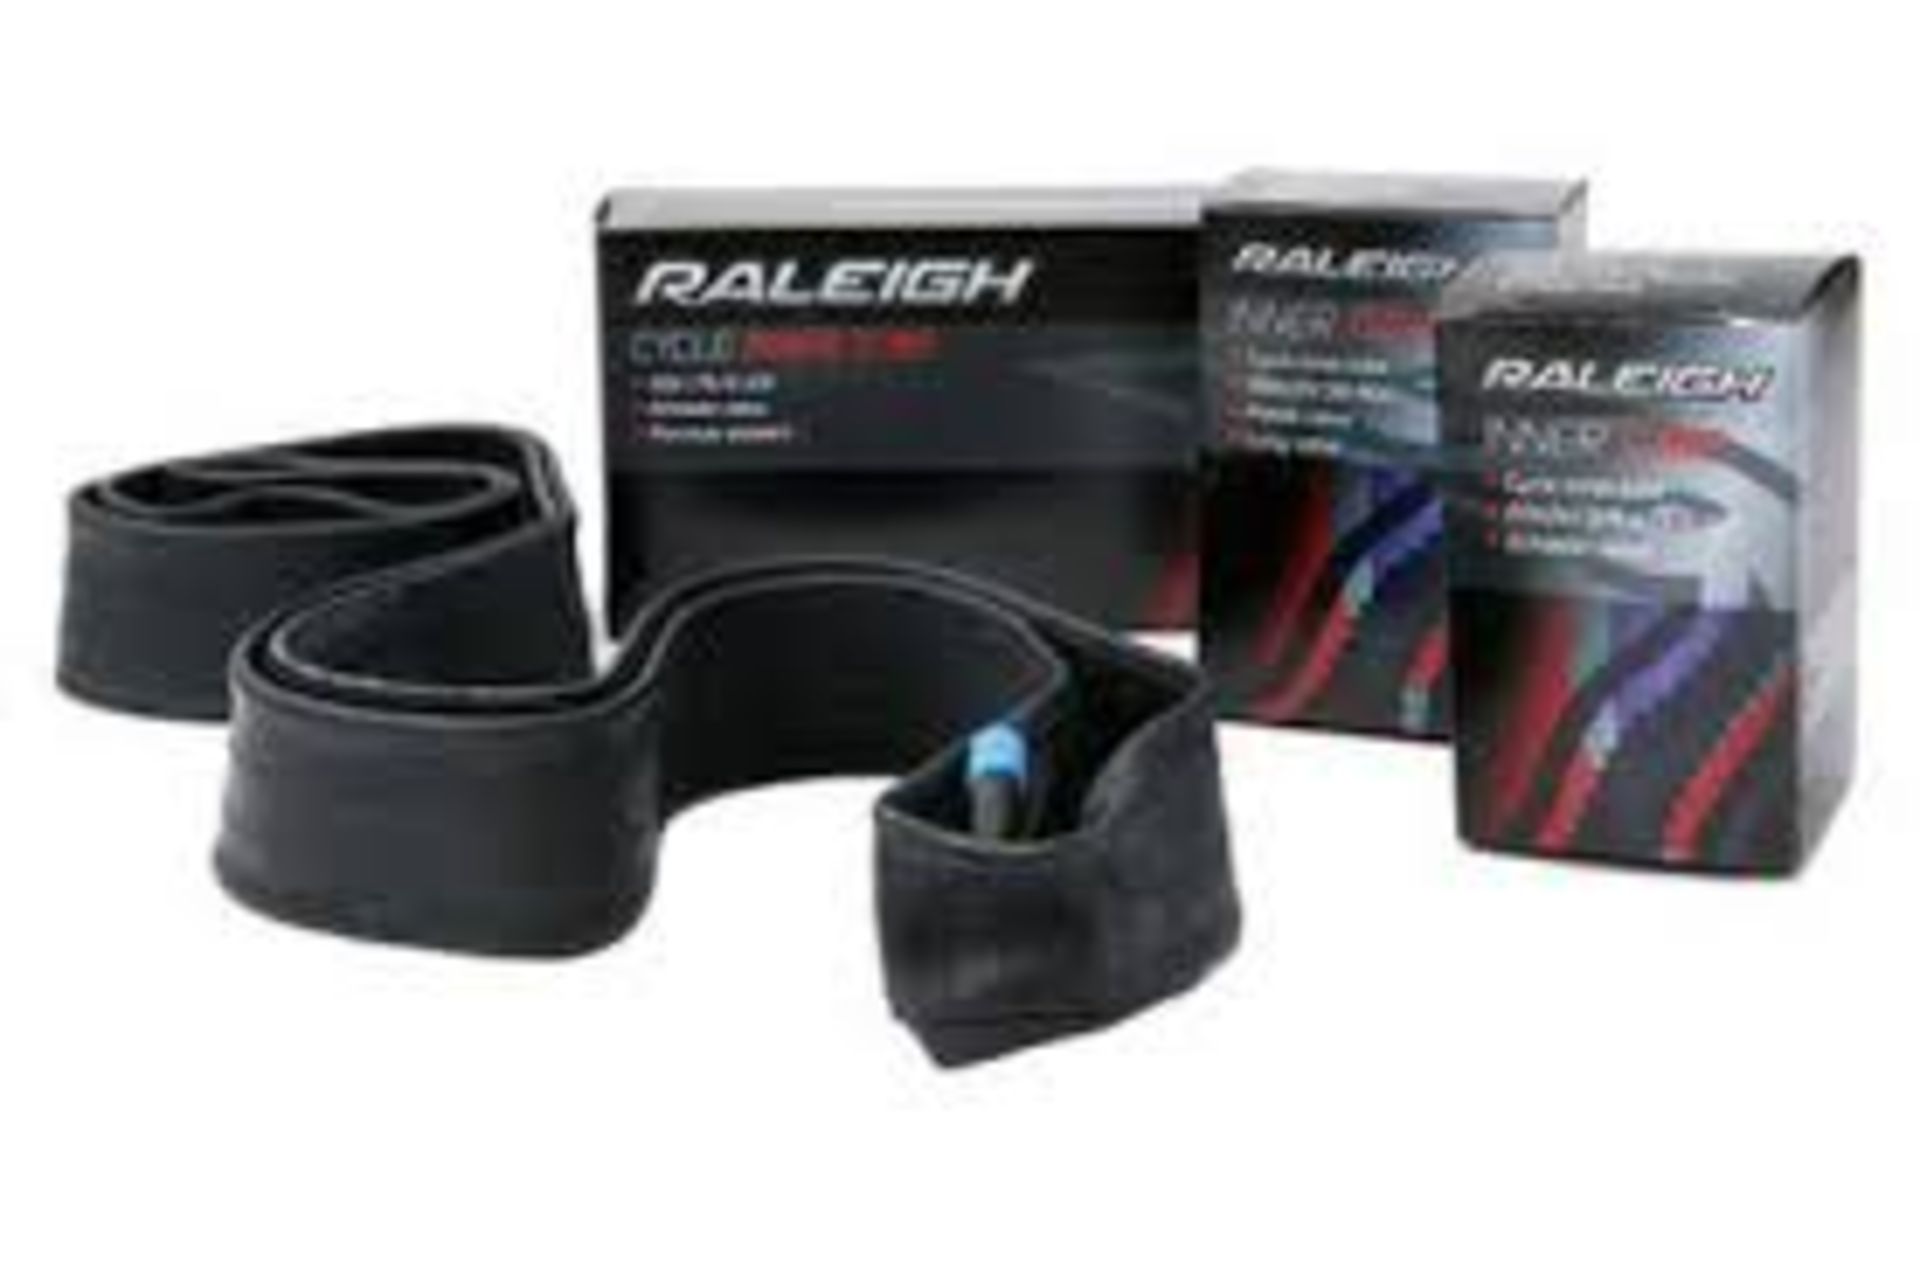 V *TRADE QTY* Brand New Two Raleigh Inner tubes 26 x 1.50-2.125 for adult mountain bike X 3 YOUR BID